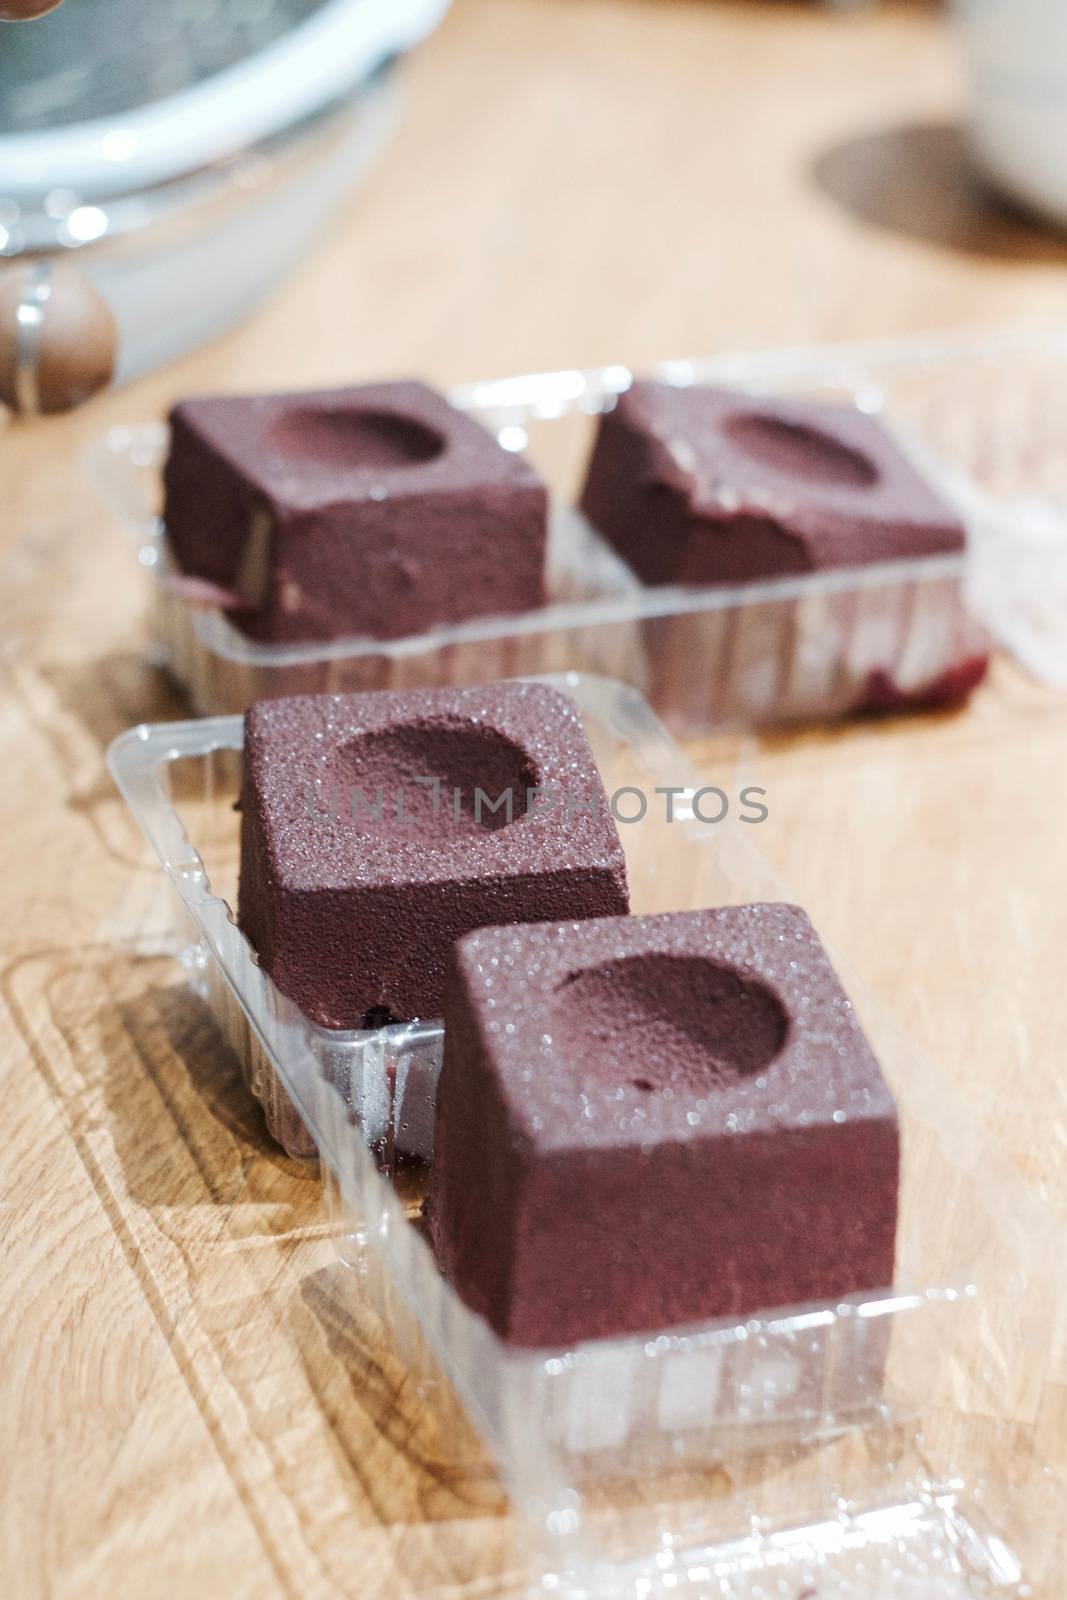 Delicious chocolate fresh and tasty cake with raspberry jam. Food concept.